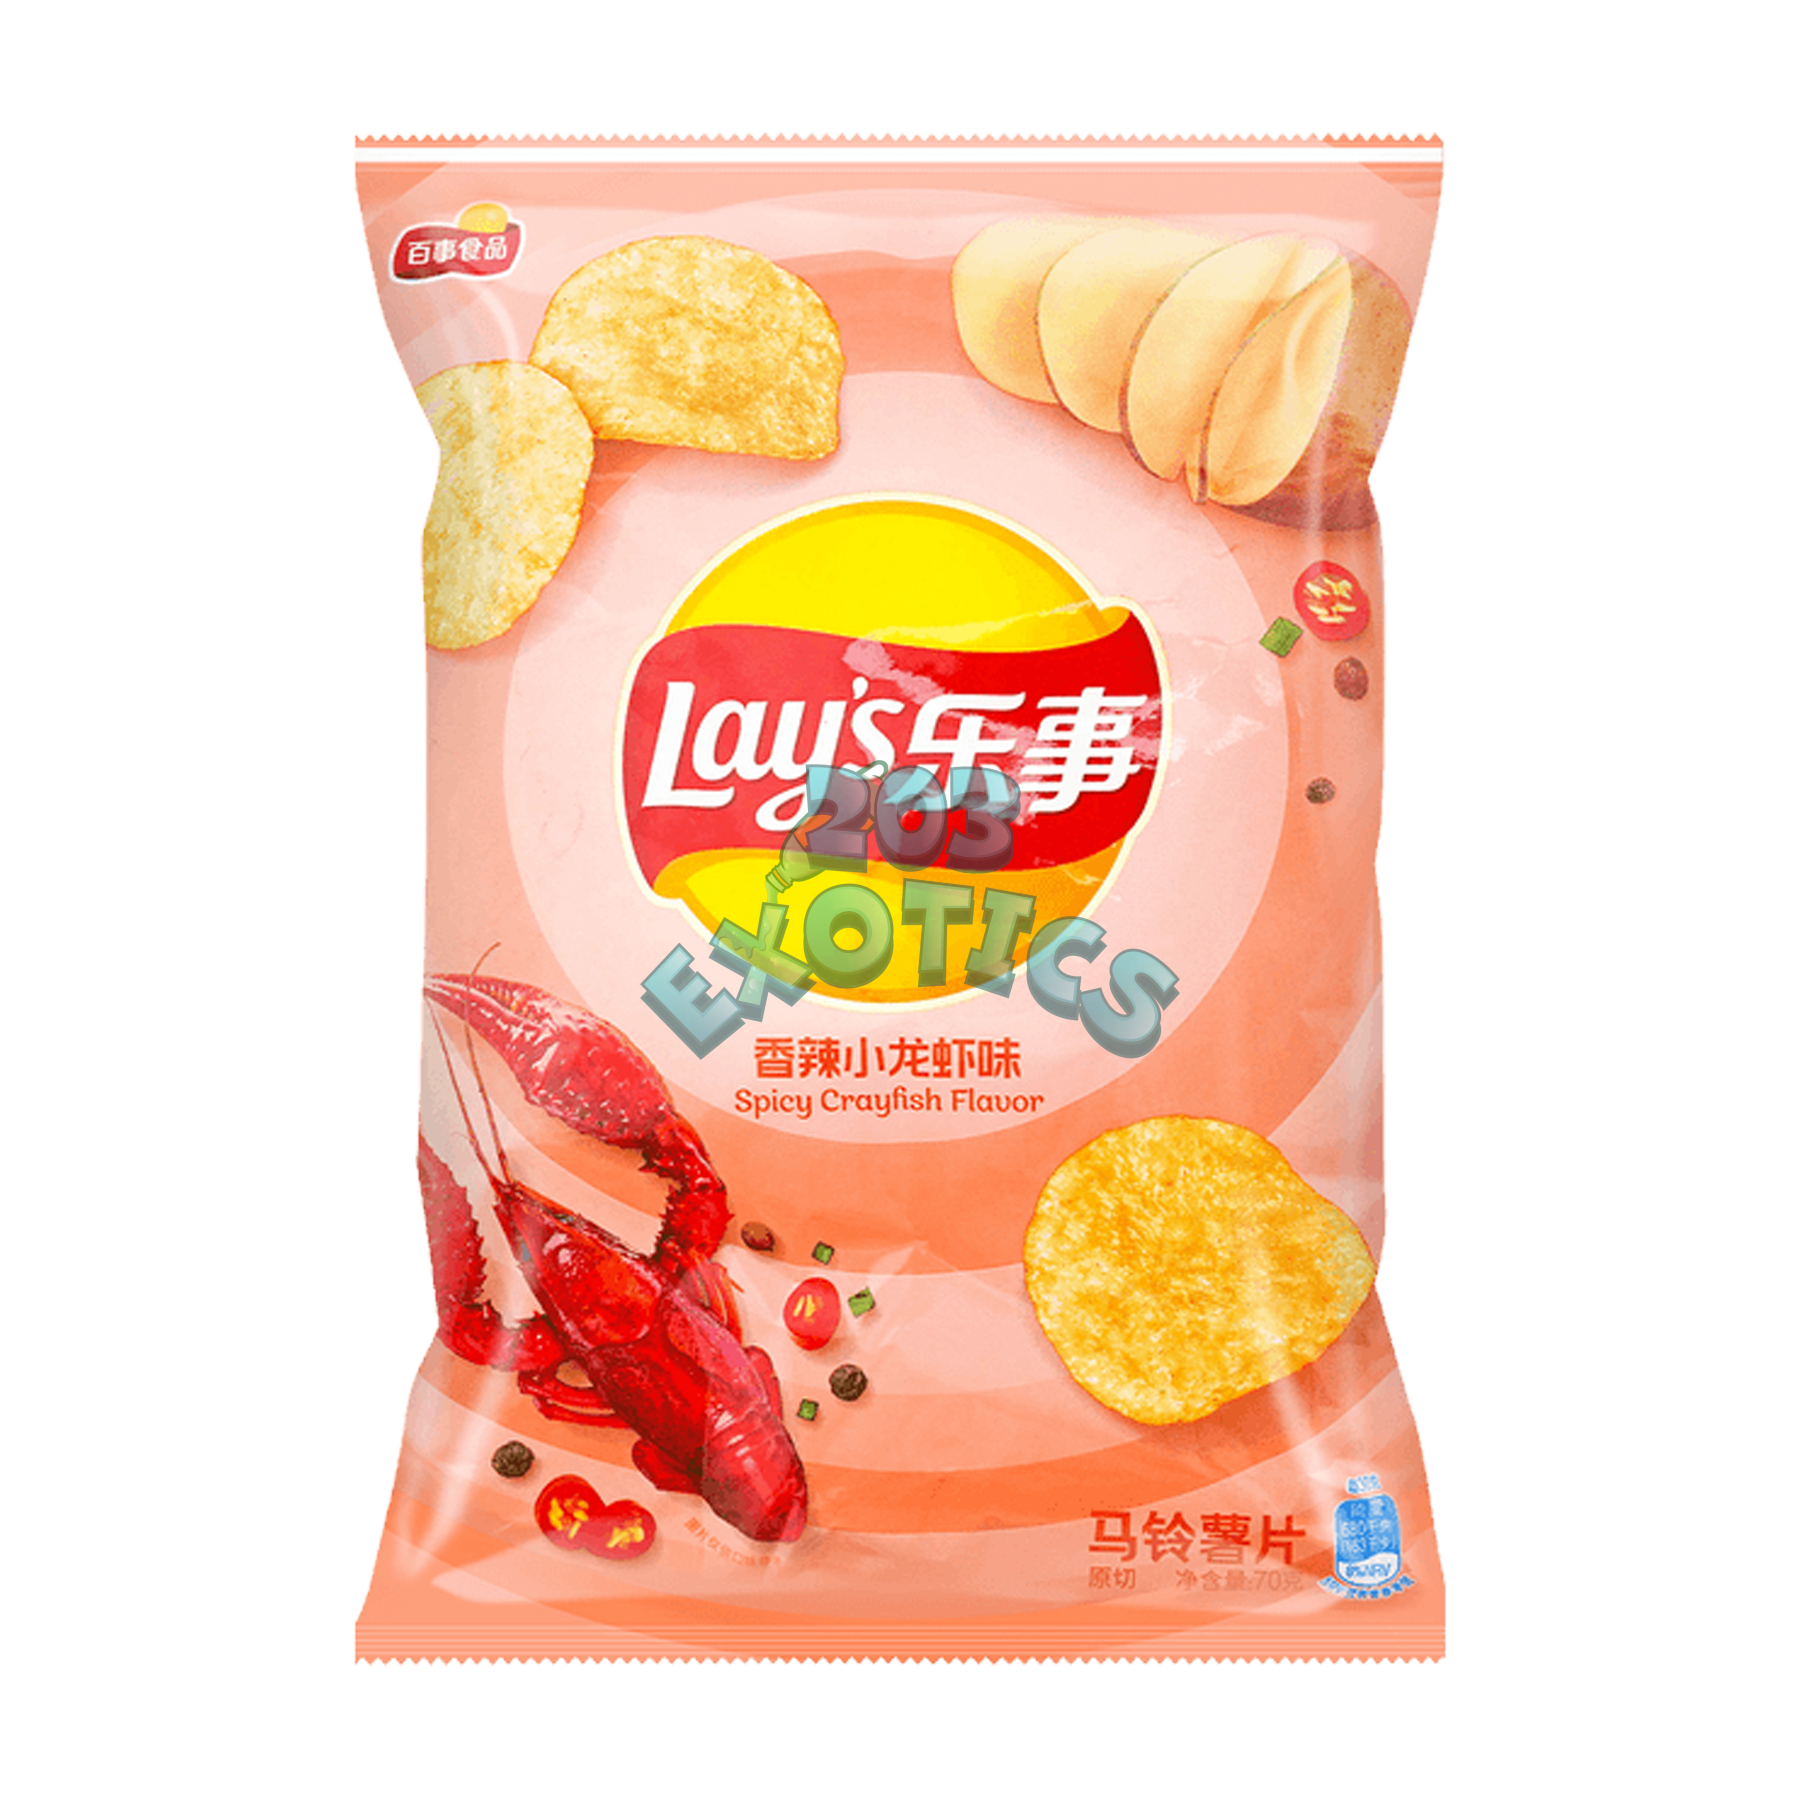 Lays Spicy Crayfish Flavored Chips (70G)